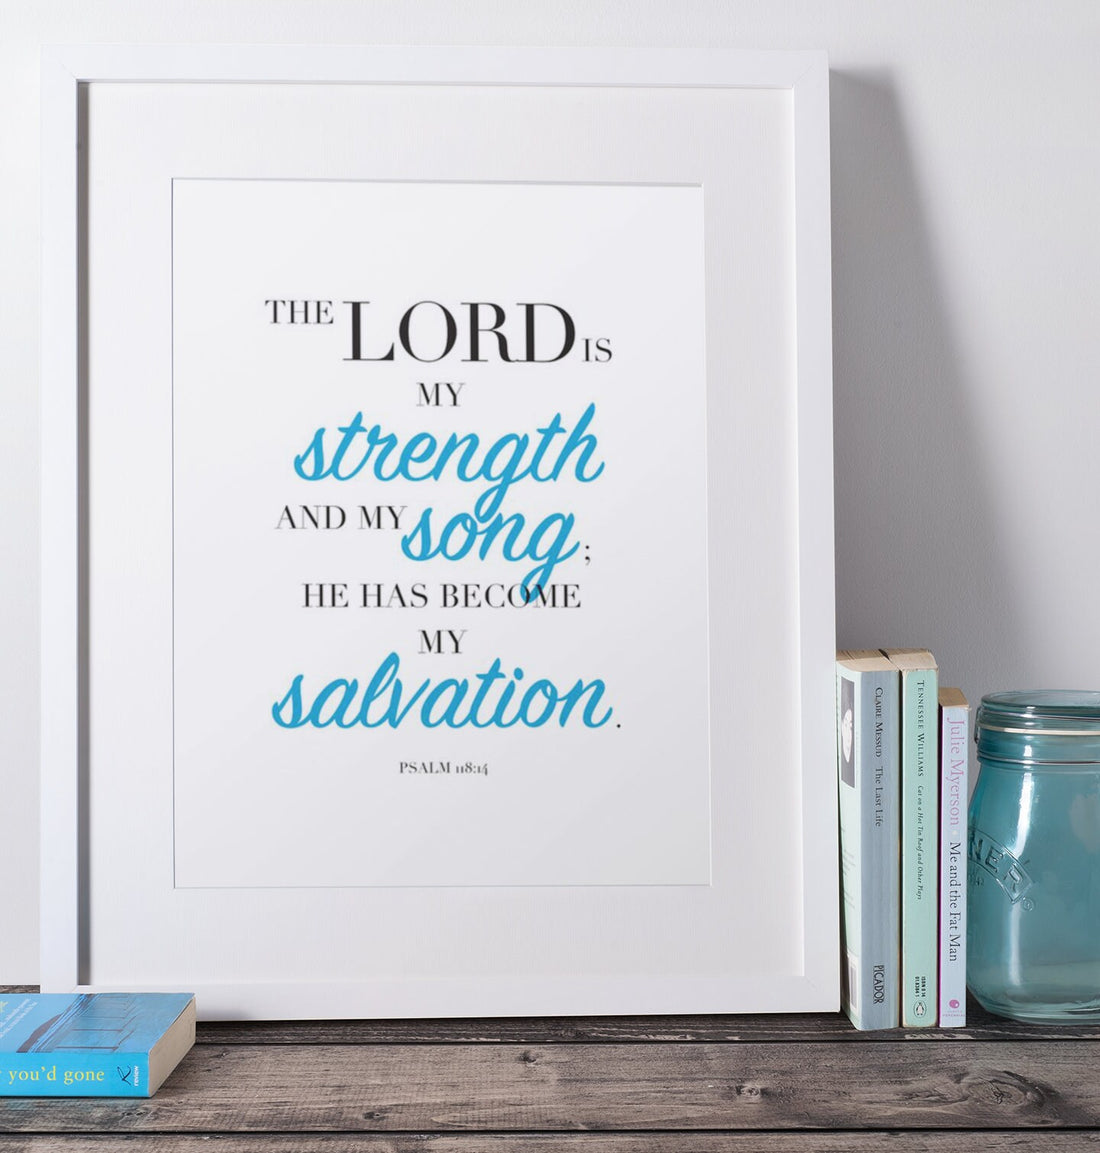 Lord is my Strength Poster - Christian Gift, Faith Spiritual, Bible Verse, Scripture, Christian Wall Decor